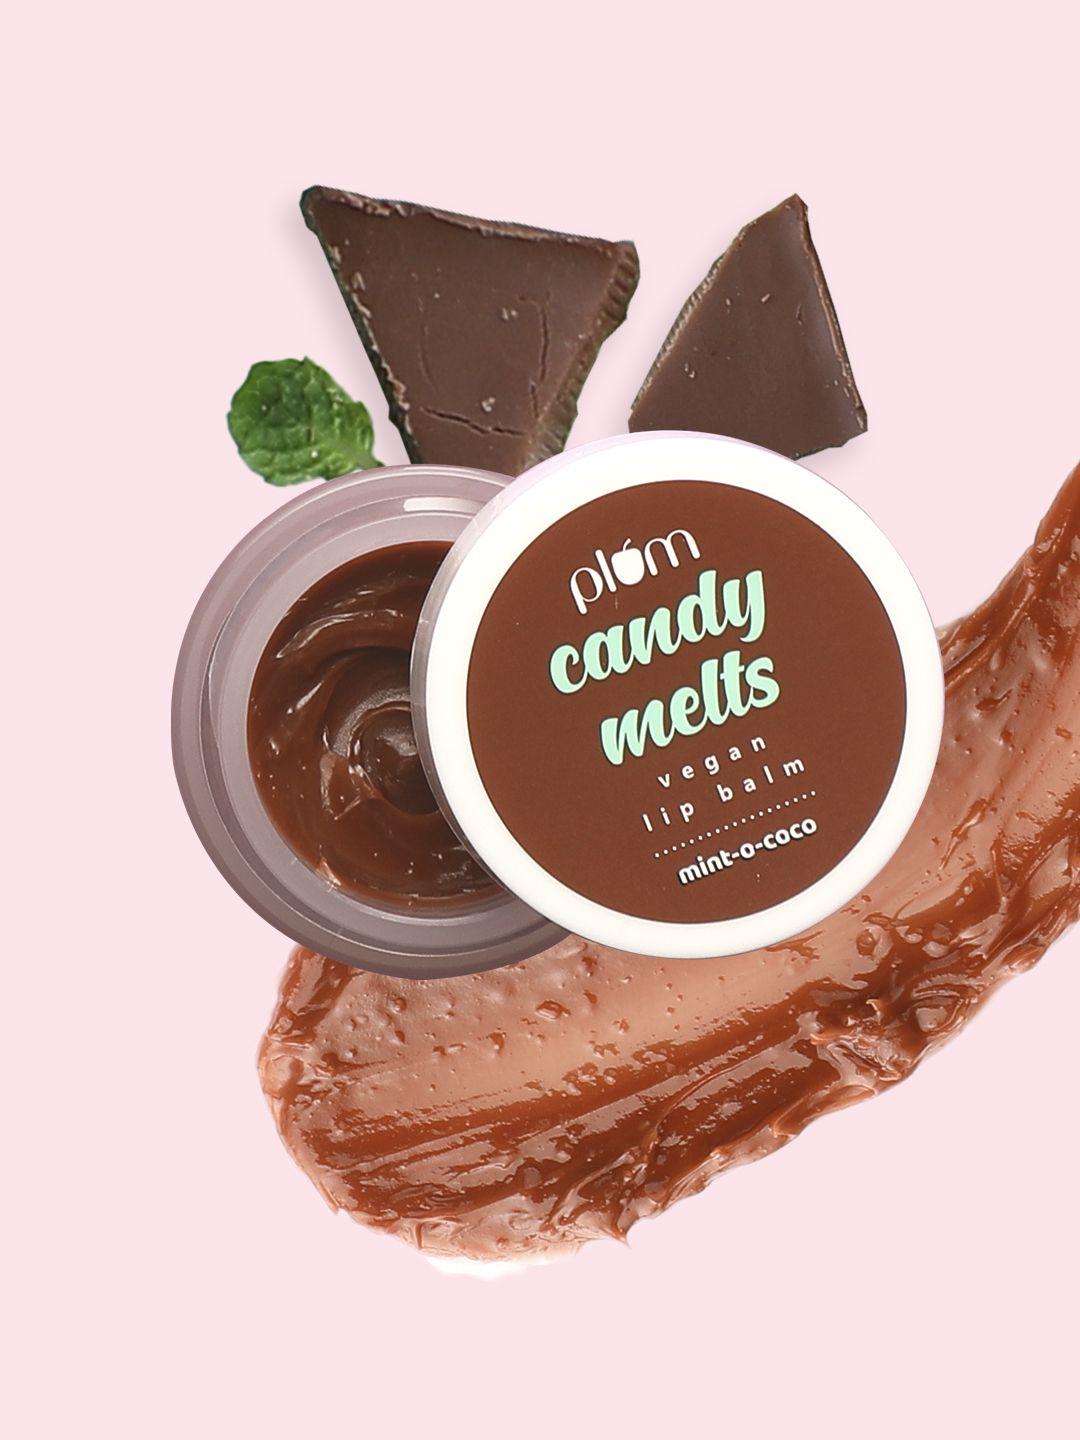 plum candy melts vegan lip balm with cocoa butter - mint-o-coco 12g